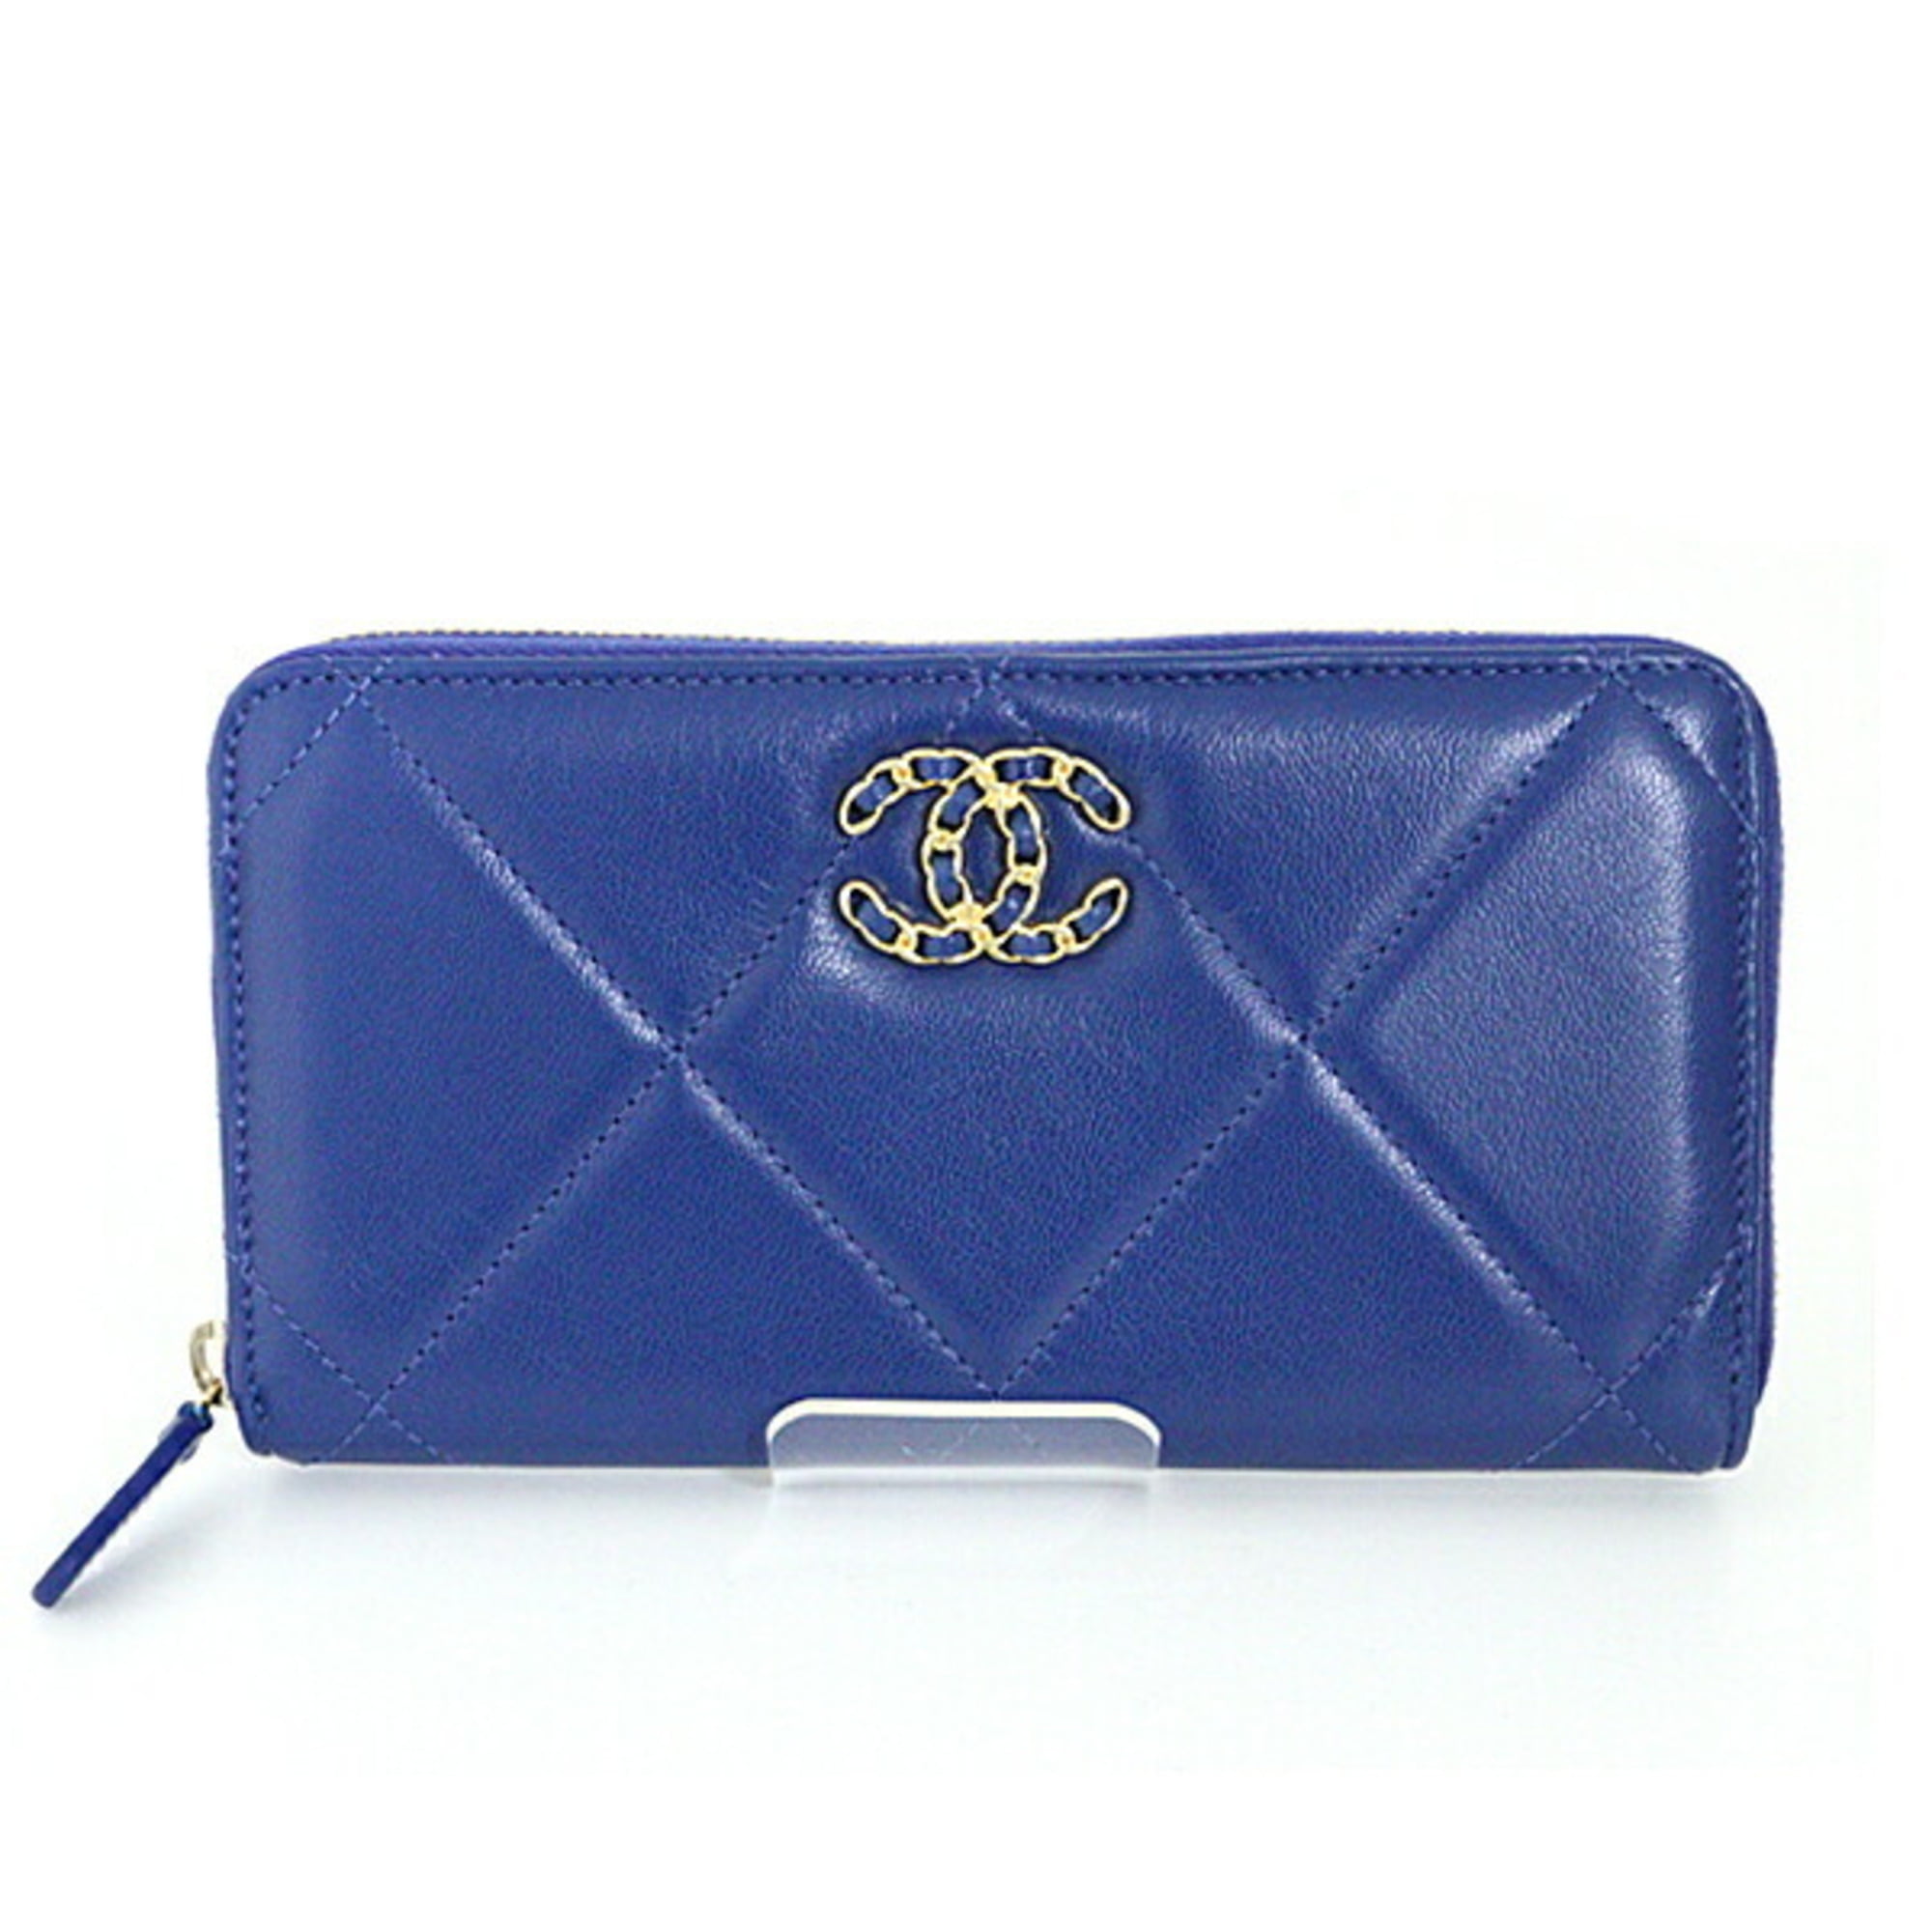 Authenticated Used Chanel CHANEL19 Dizeneuf long zip AP1063 round wallet 29  series lambskin blue 